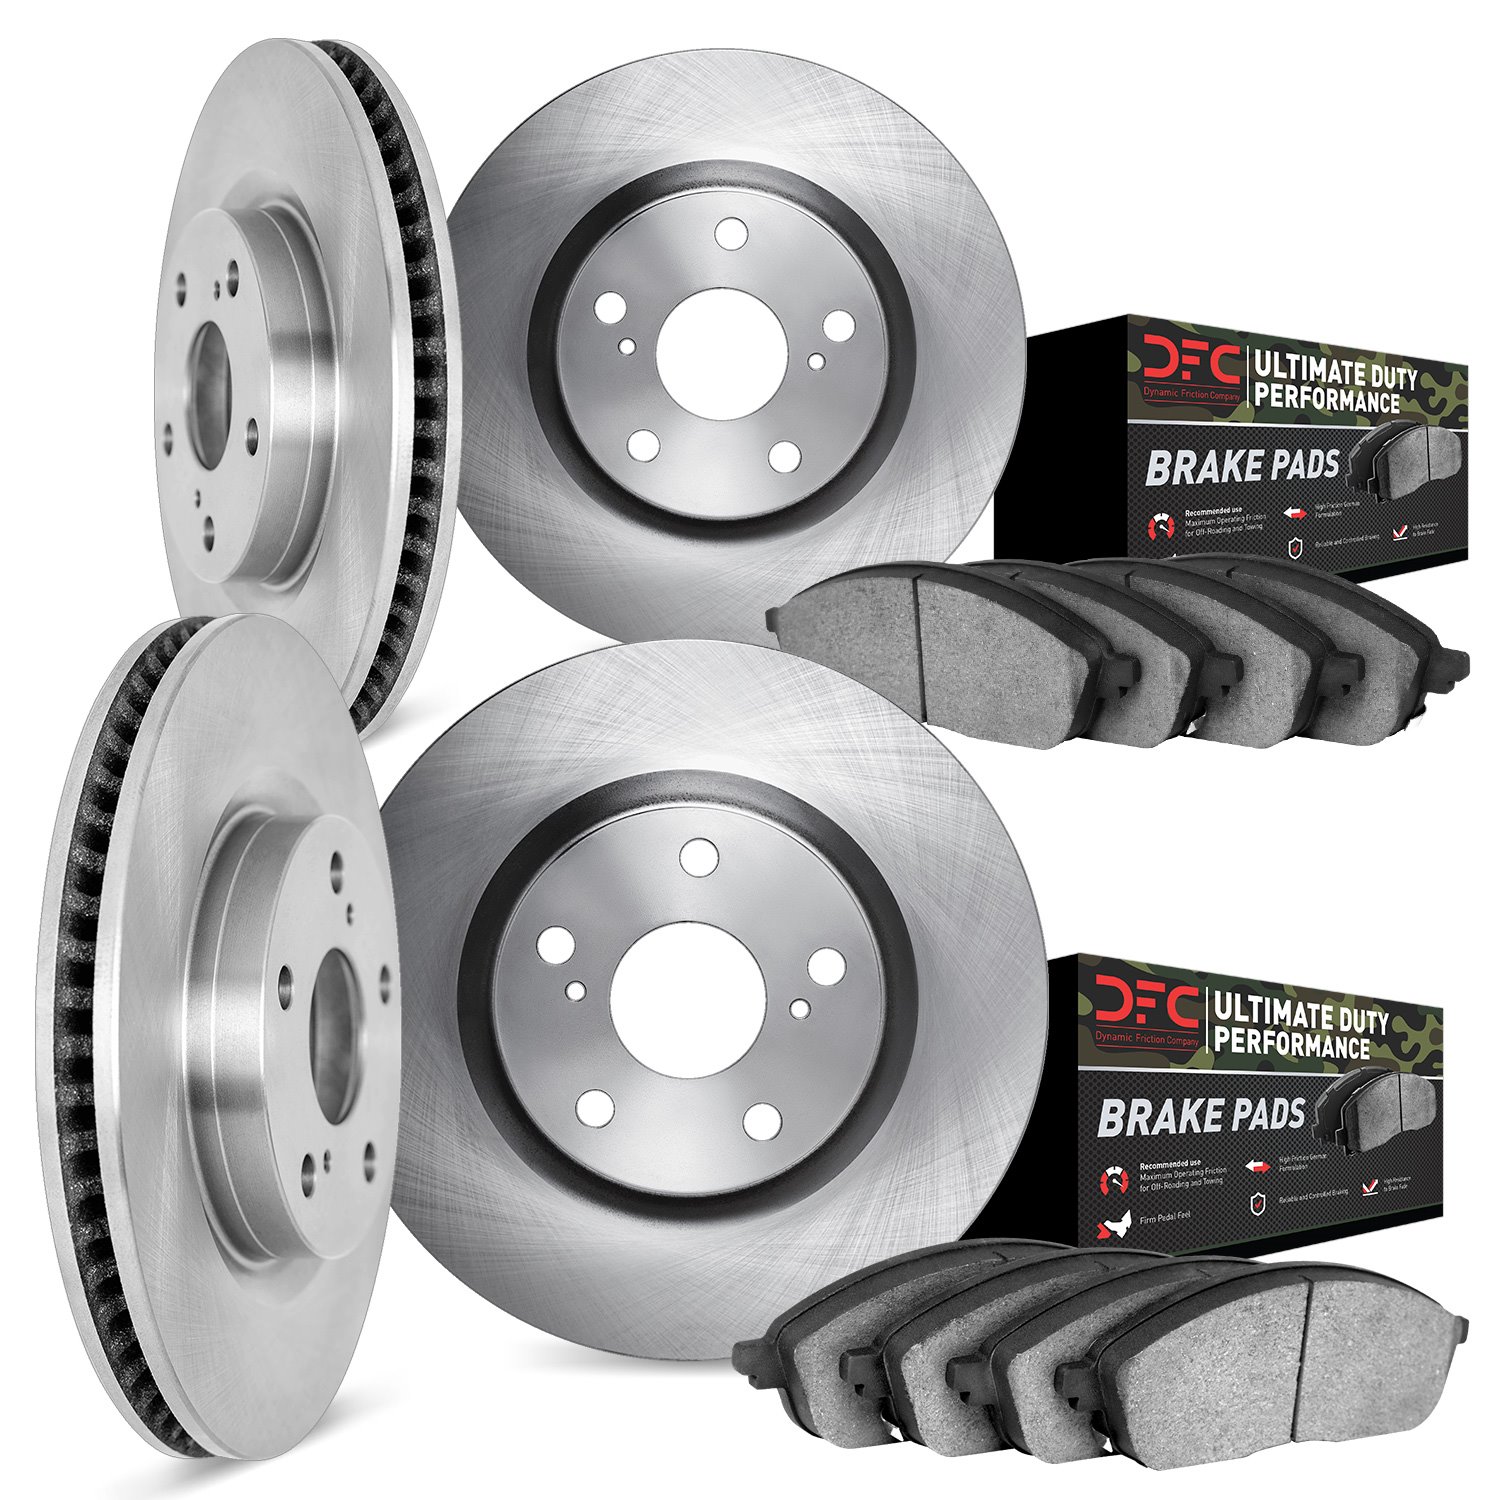 6404-39002 Brake Rotors with Ultimate-Duty Brake Pads, Fits Select Mopar, Position: Front and Rear